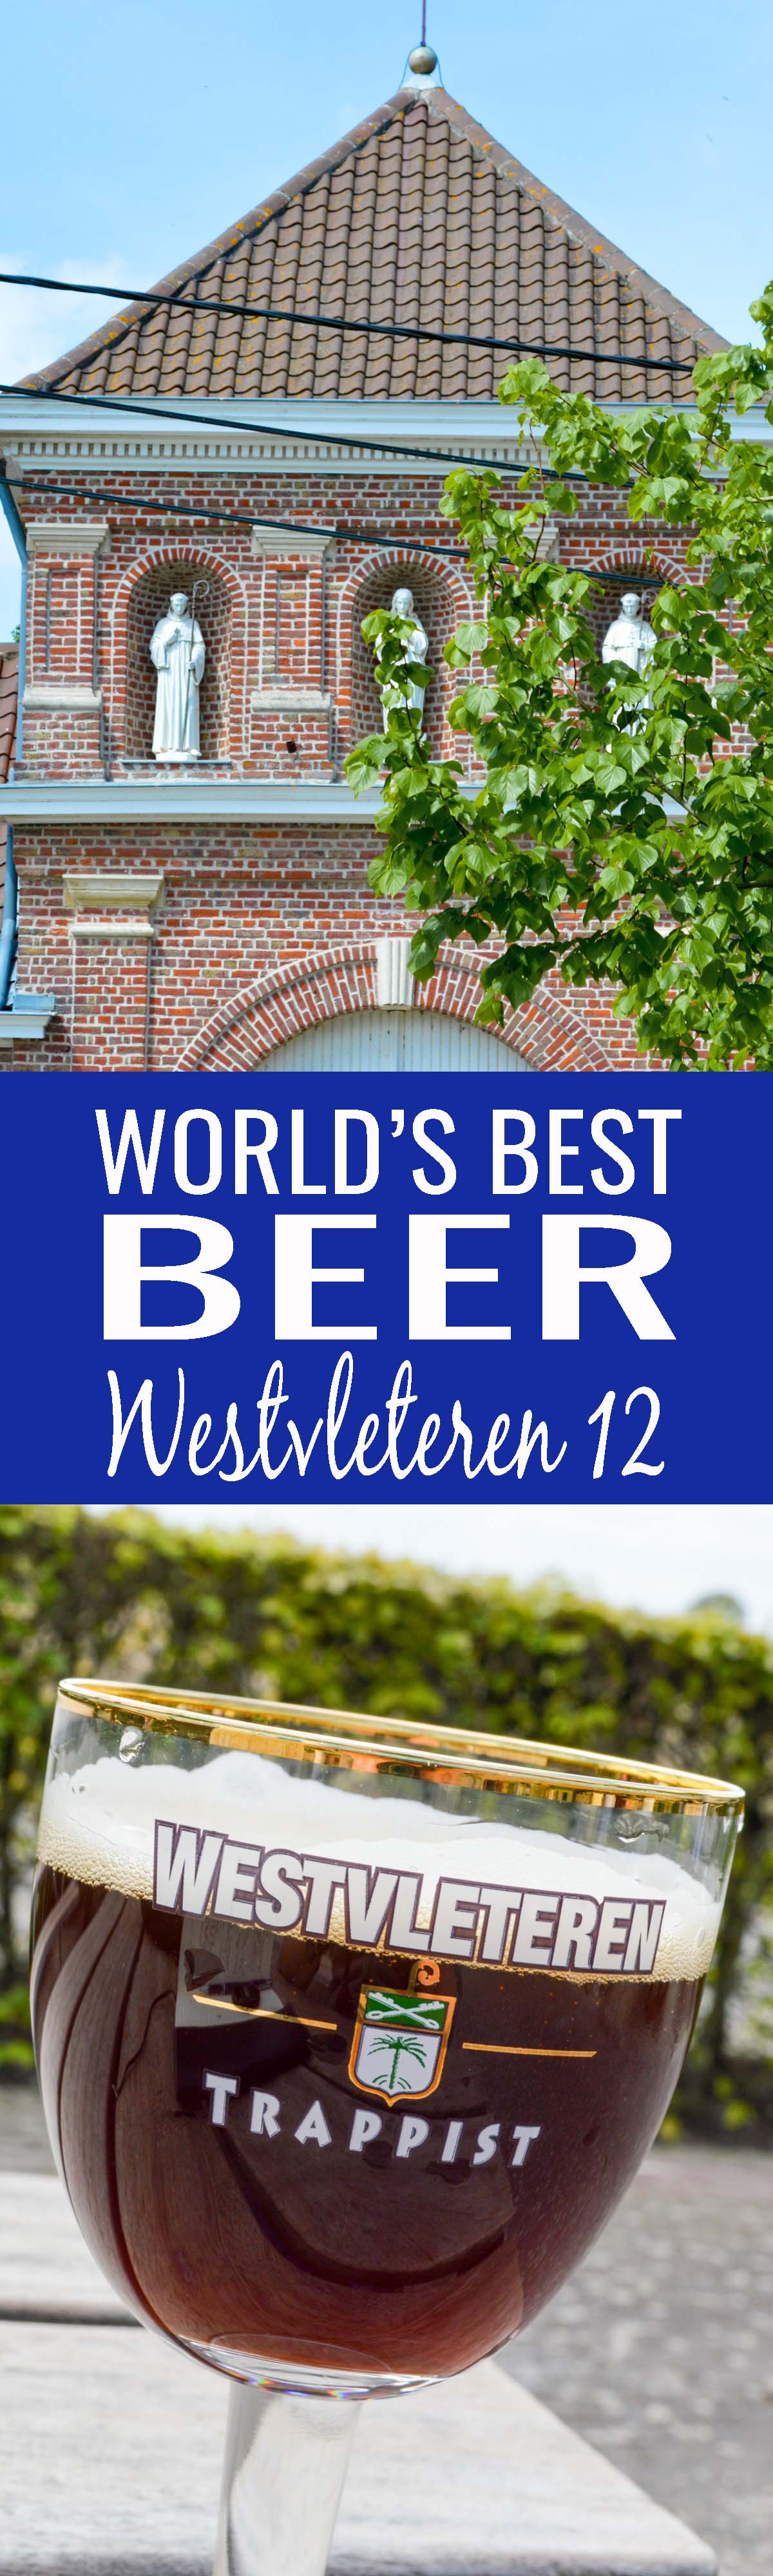 A visit to Sint Sixtus Abbey to drink Westvleteren 12 from the source. Yes, this very well could be the world’s best beer!